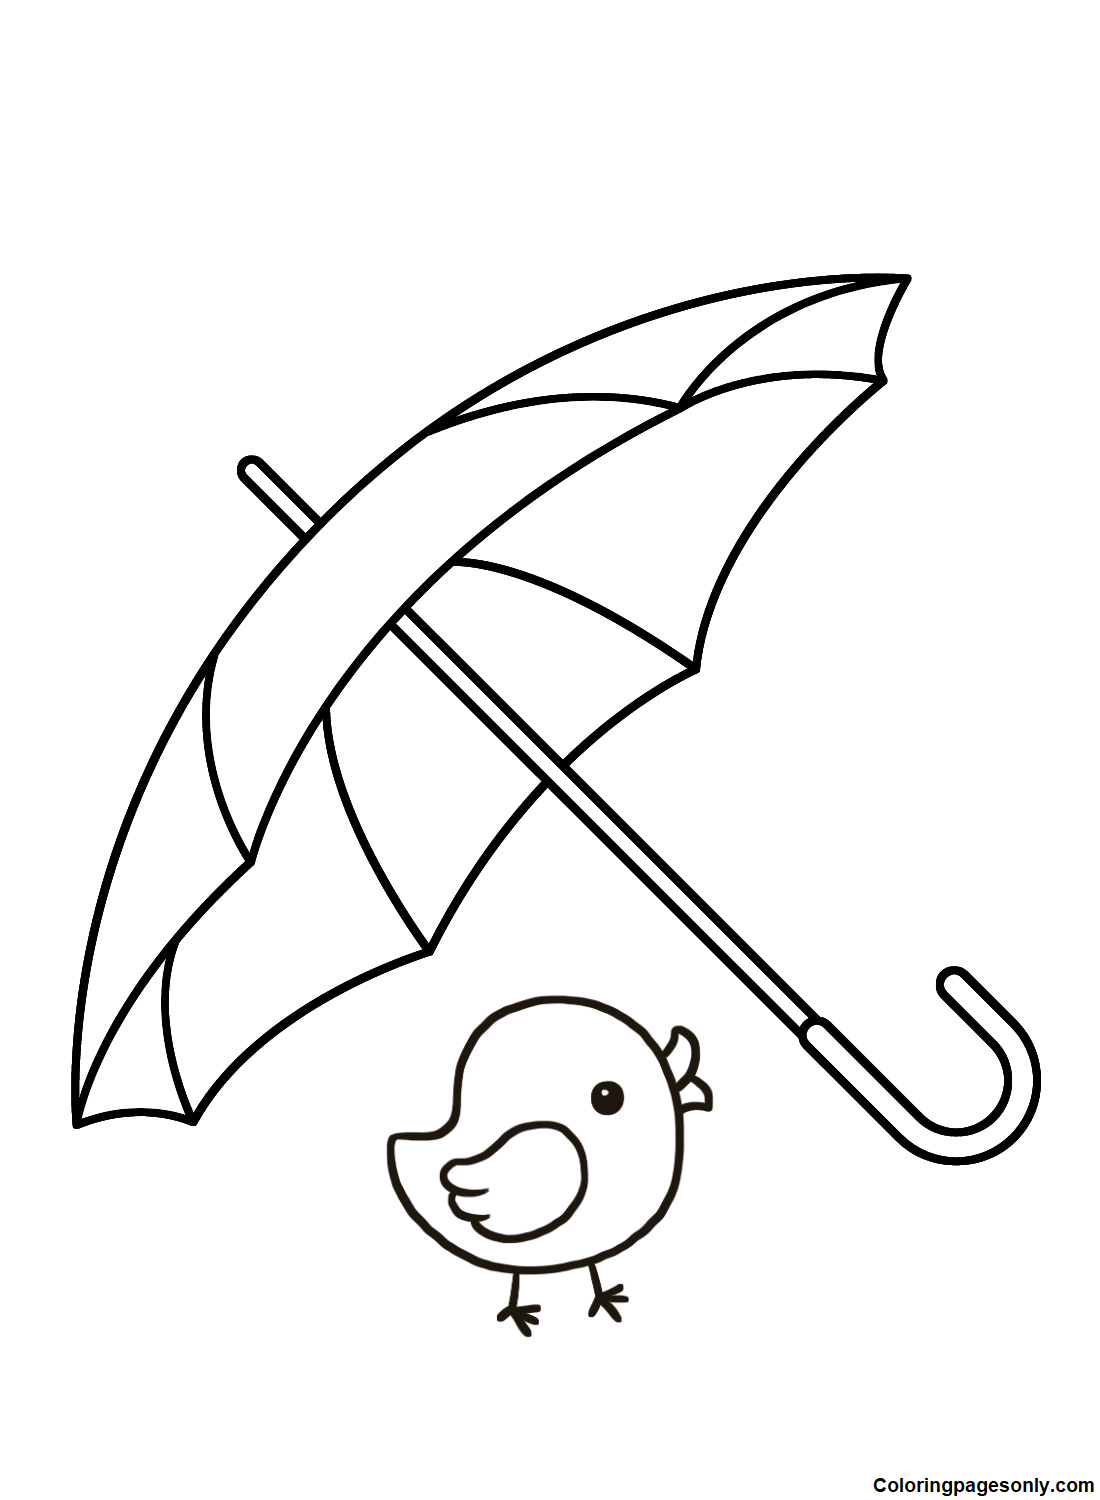 Umbrella with Chick Coloring Page